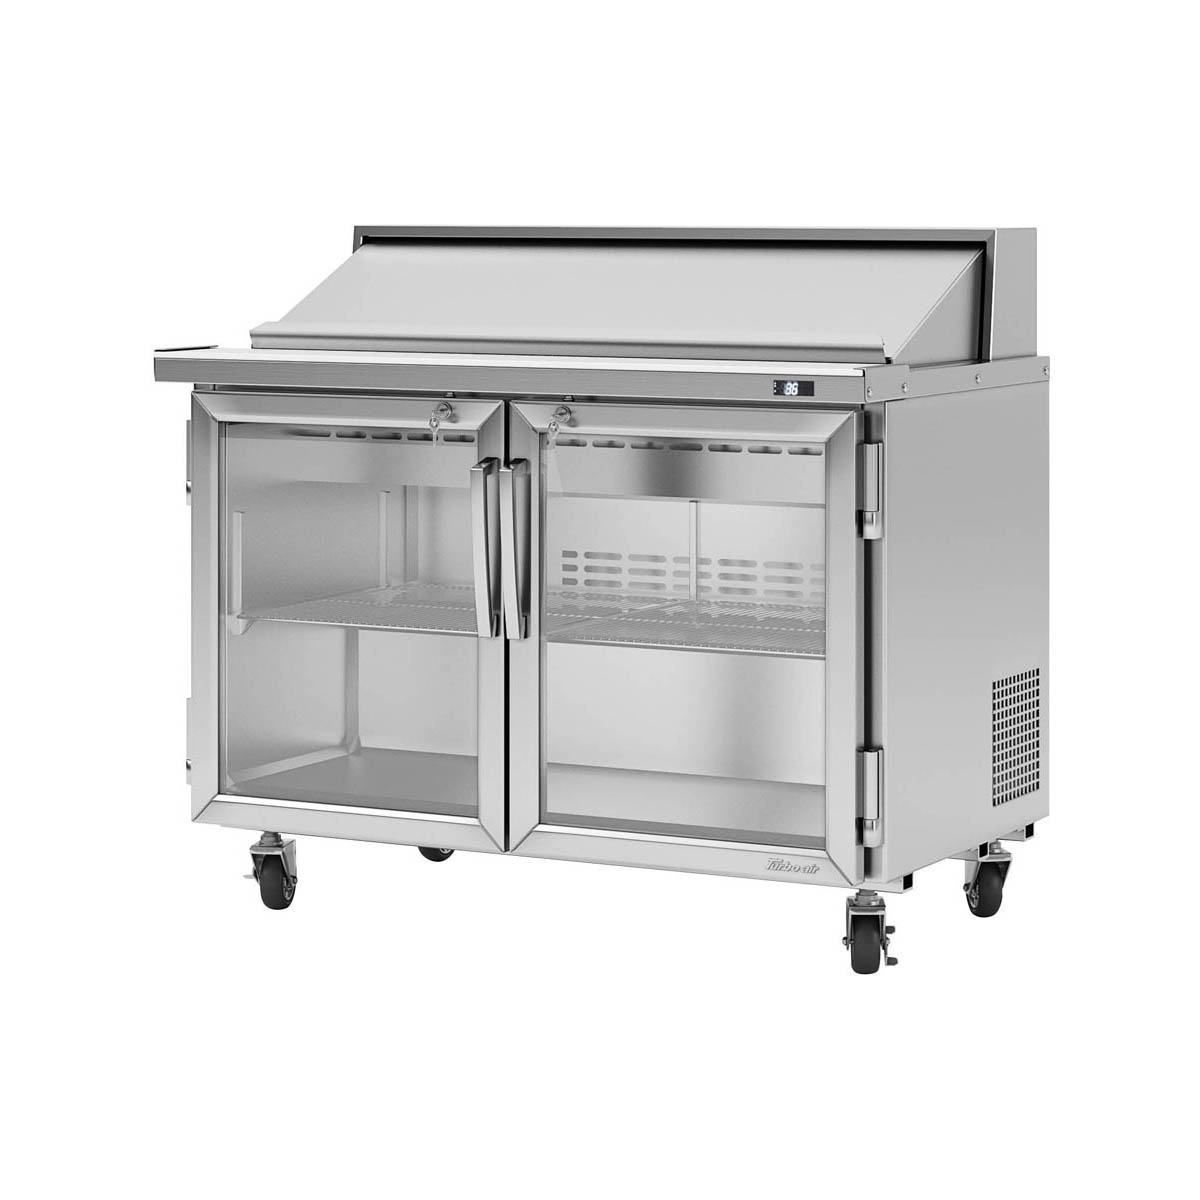 Turbo Air PST-48-G-N 48″ Two Section Sandwich / Salad Prep Table, 12.0 cu. ft.